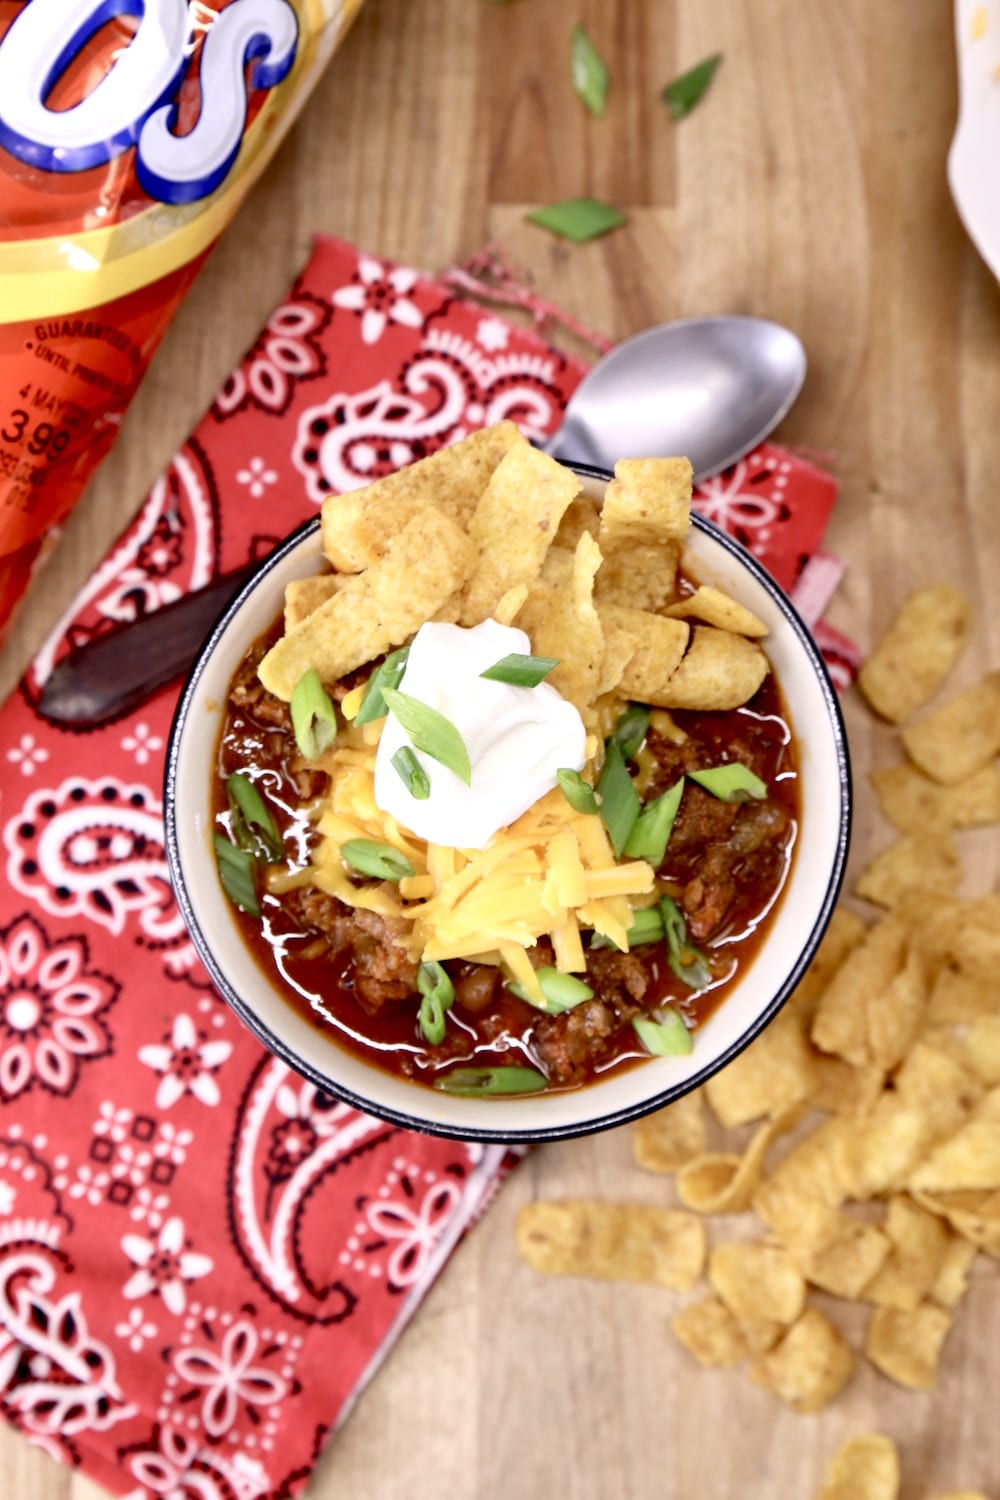 Overhead of bowl of chili with sour cream, cheese and Fritos on a red bandana napkin